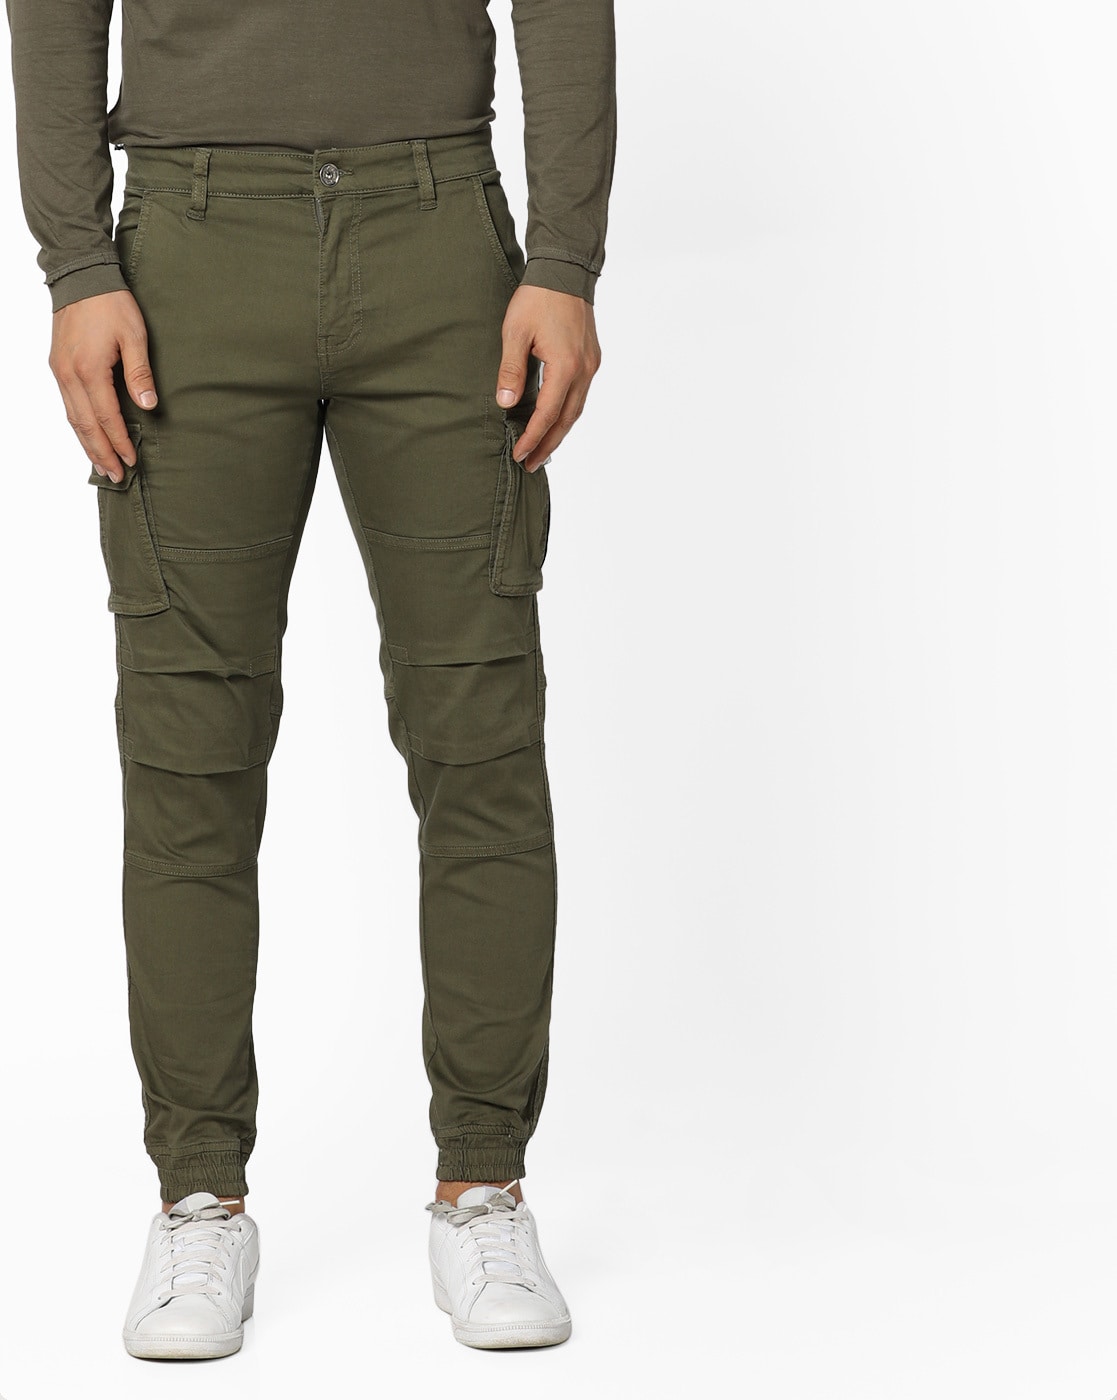 olive green cargo trousers